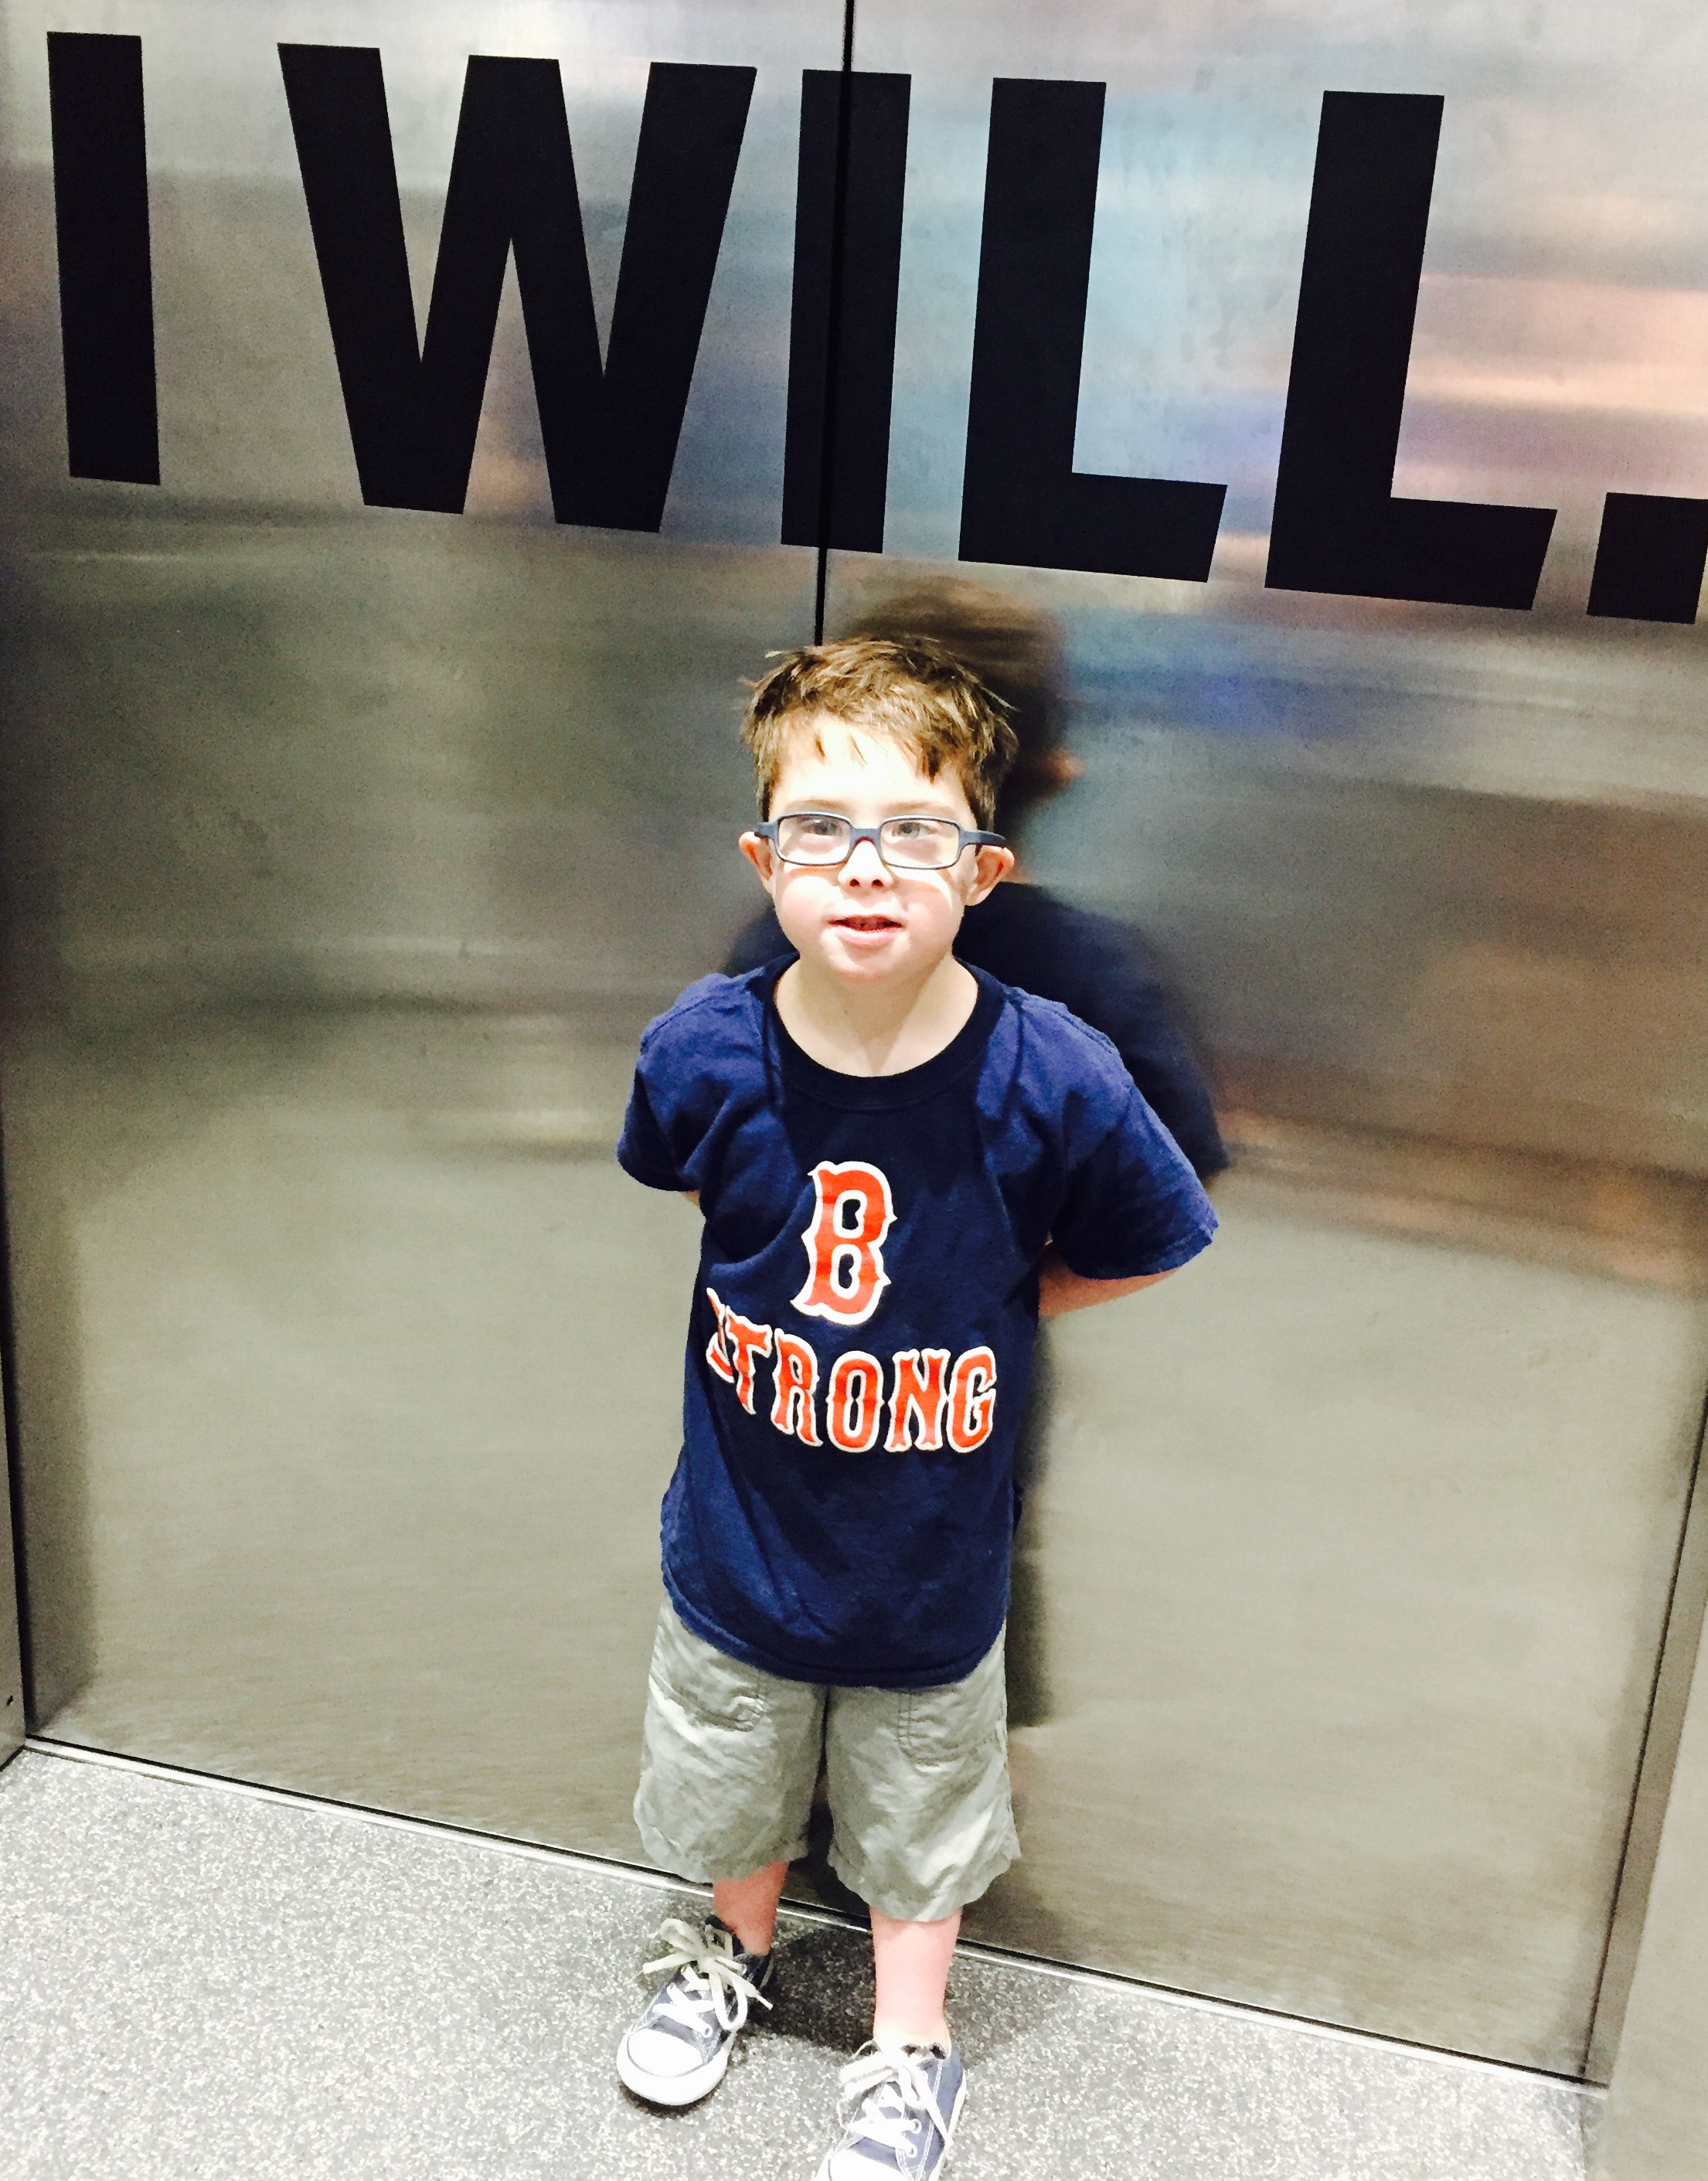 The author's son standing in front of a mirrored wall that says "I Will"